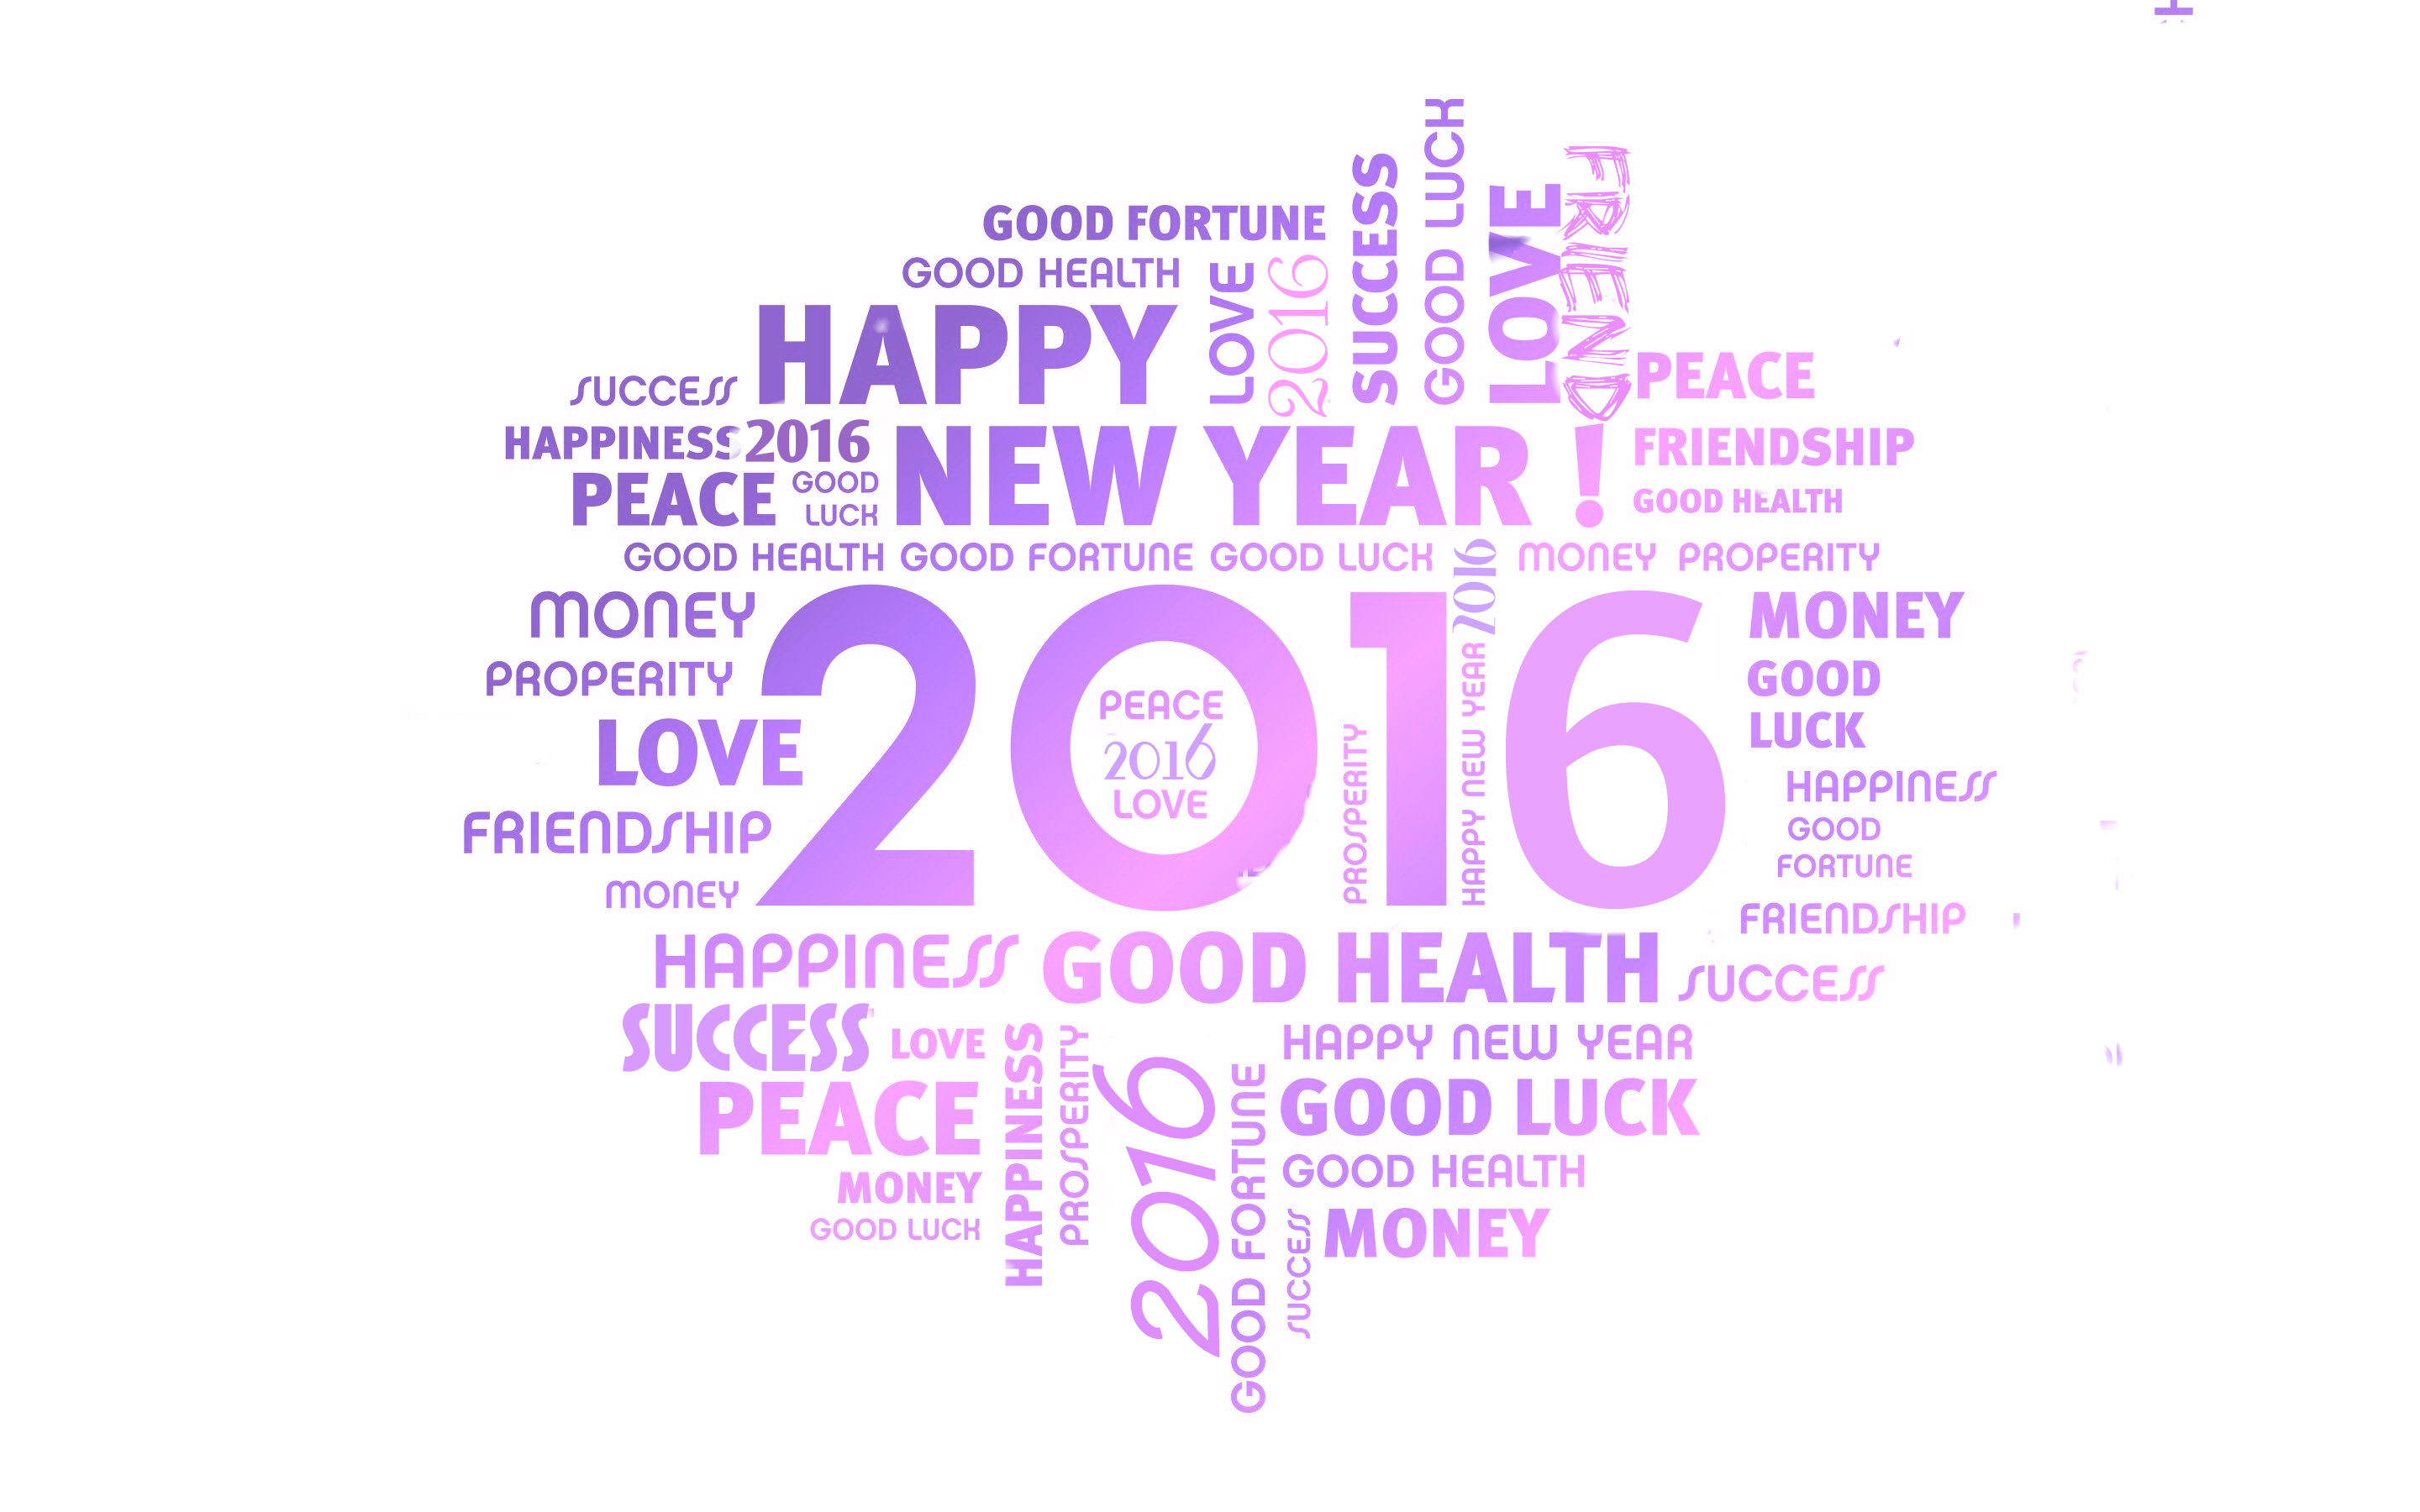 Happy New Year Wallpaper Pictures Image